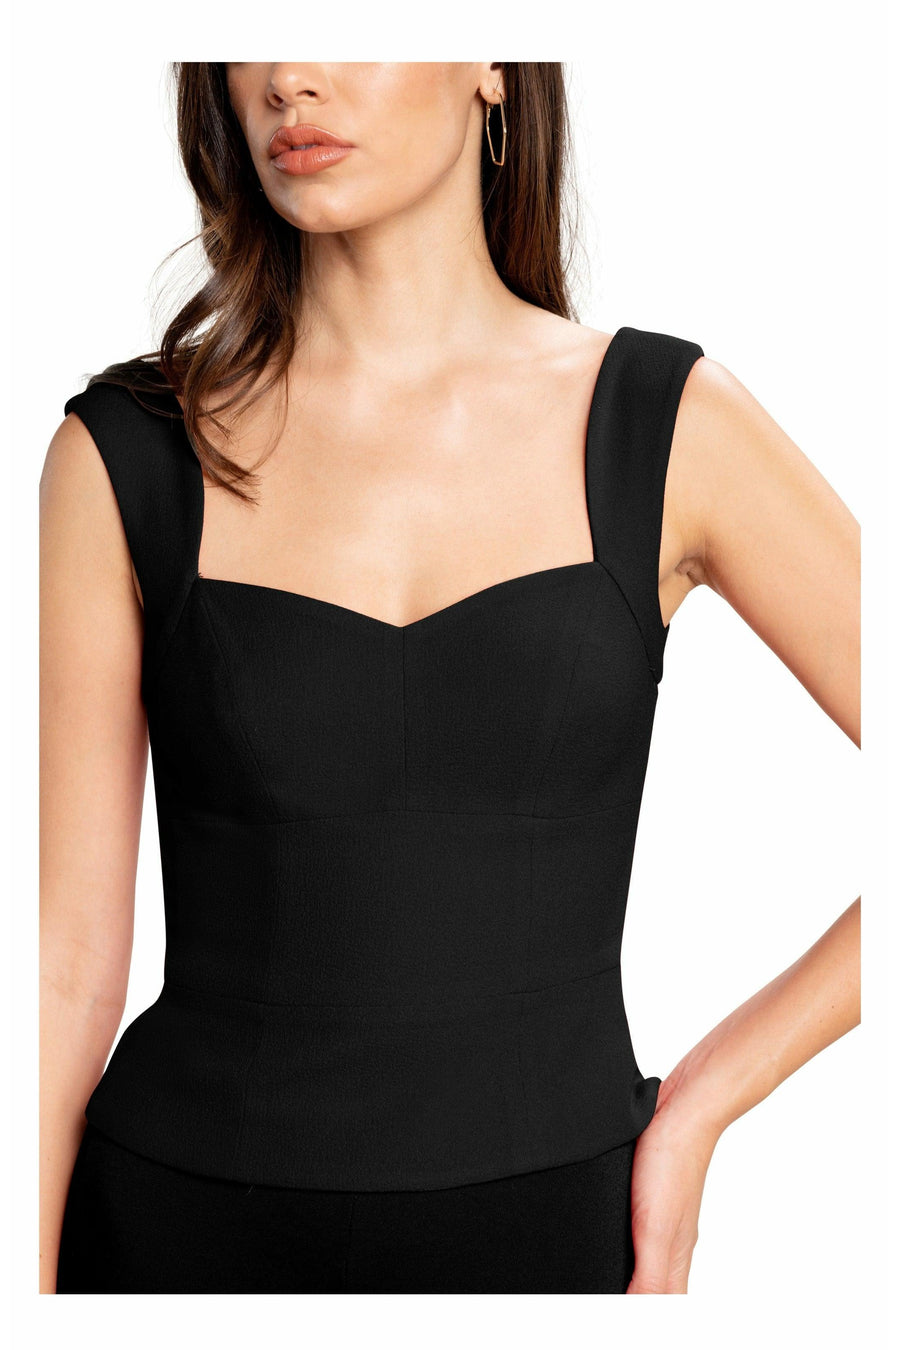 Women's Low Cut Square Neck Top - Capped Sleeves / Black